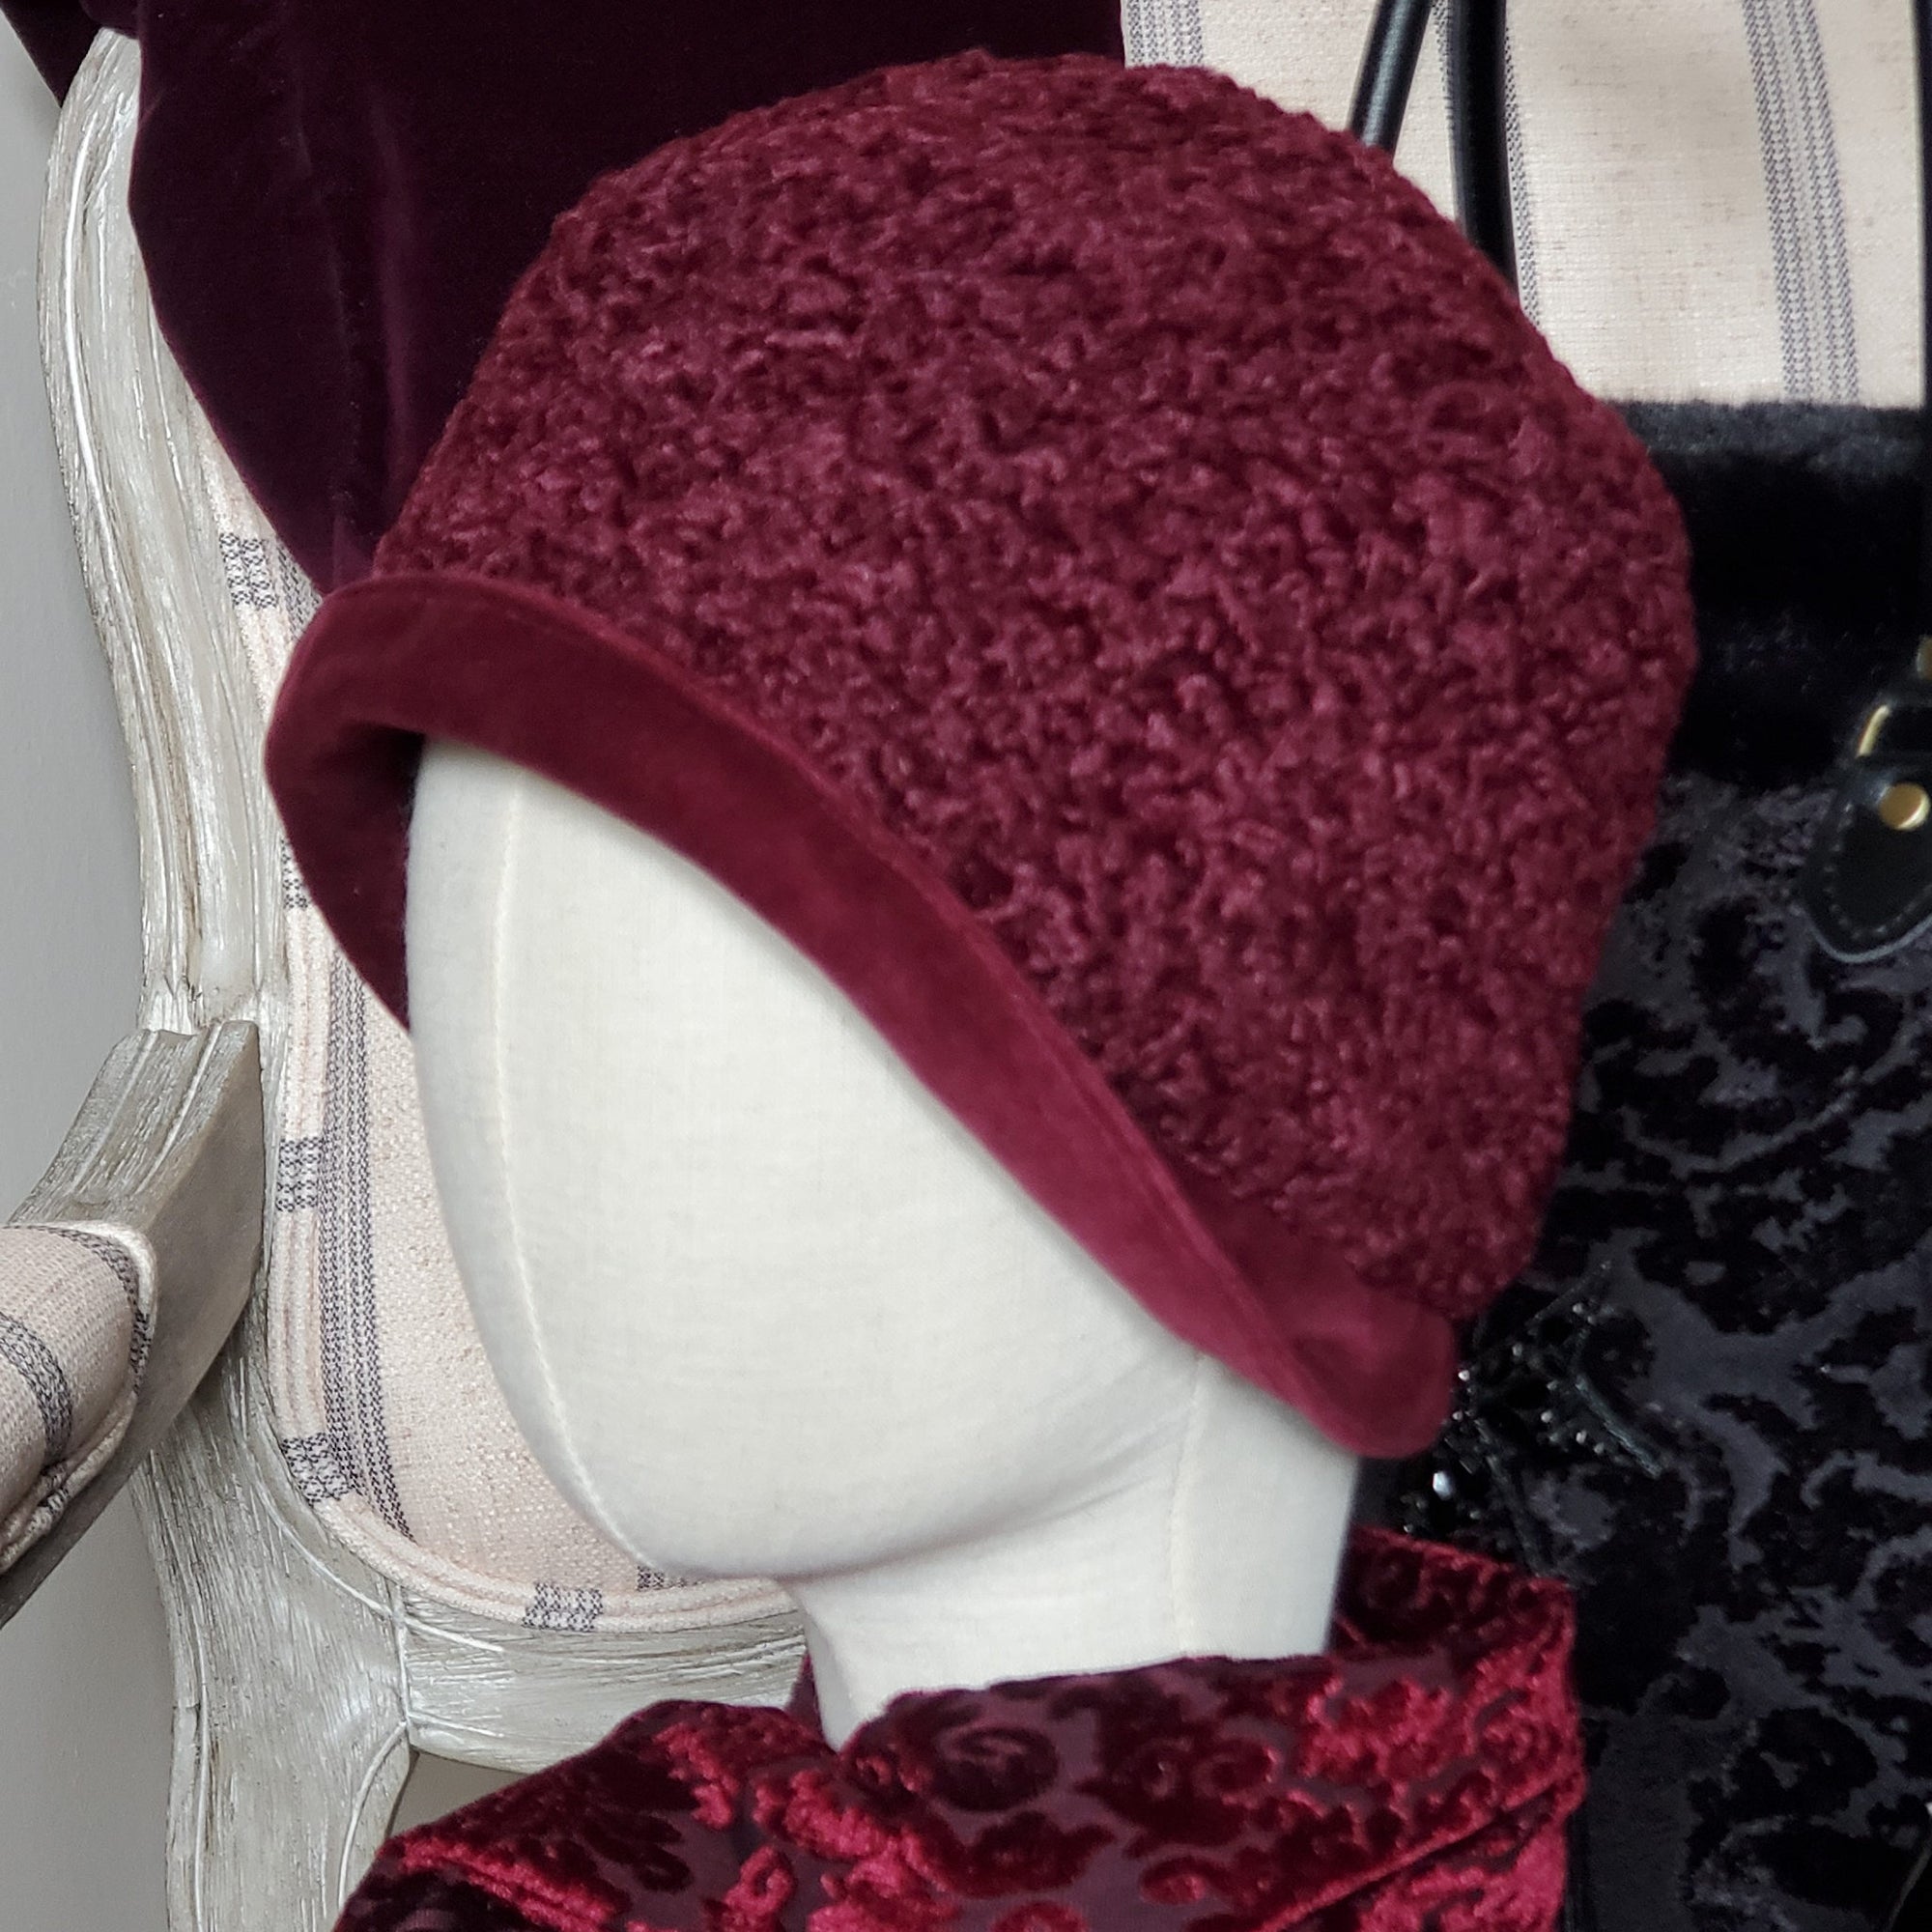 Vintage Womens Hats 1920s with a brim that can be turned up with a matching burgundy scarf.